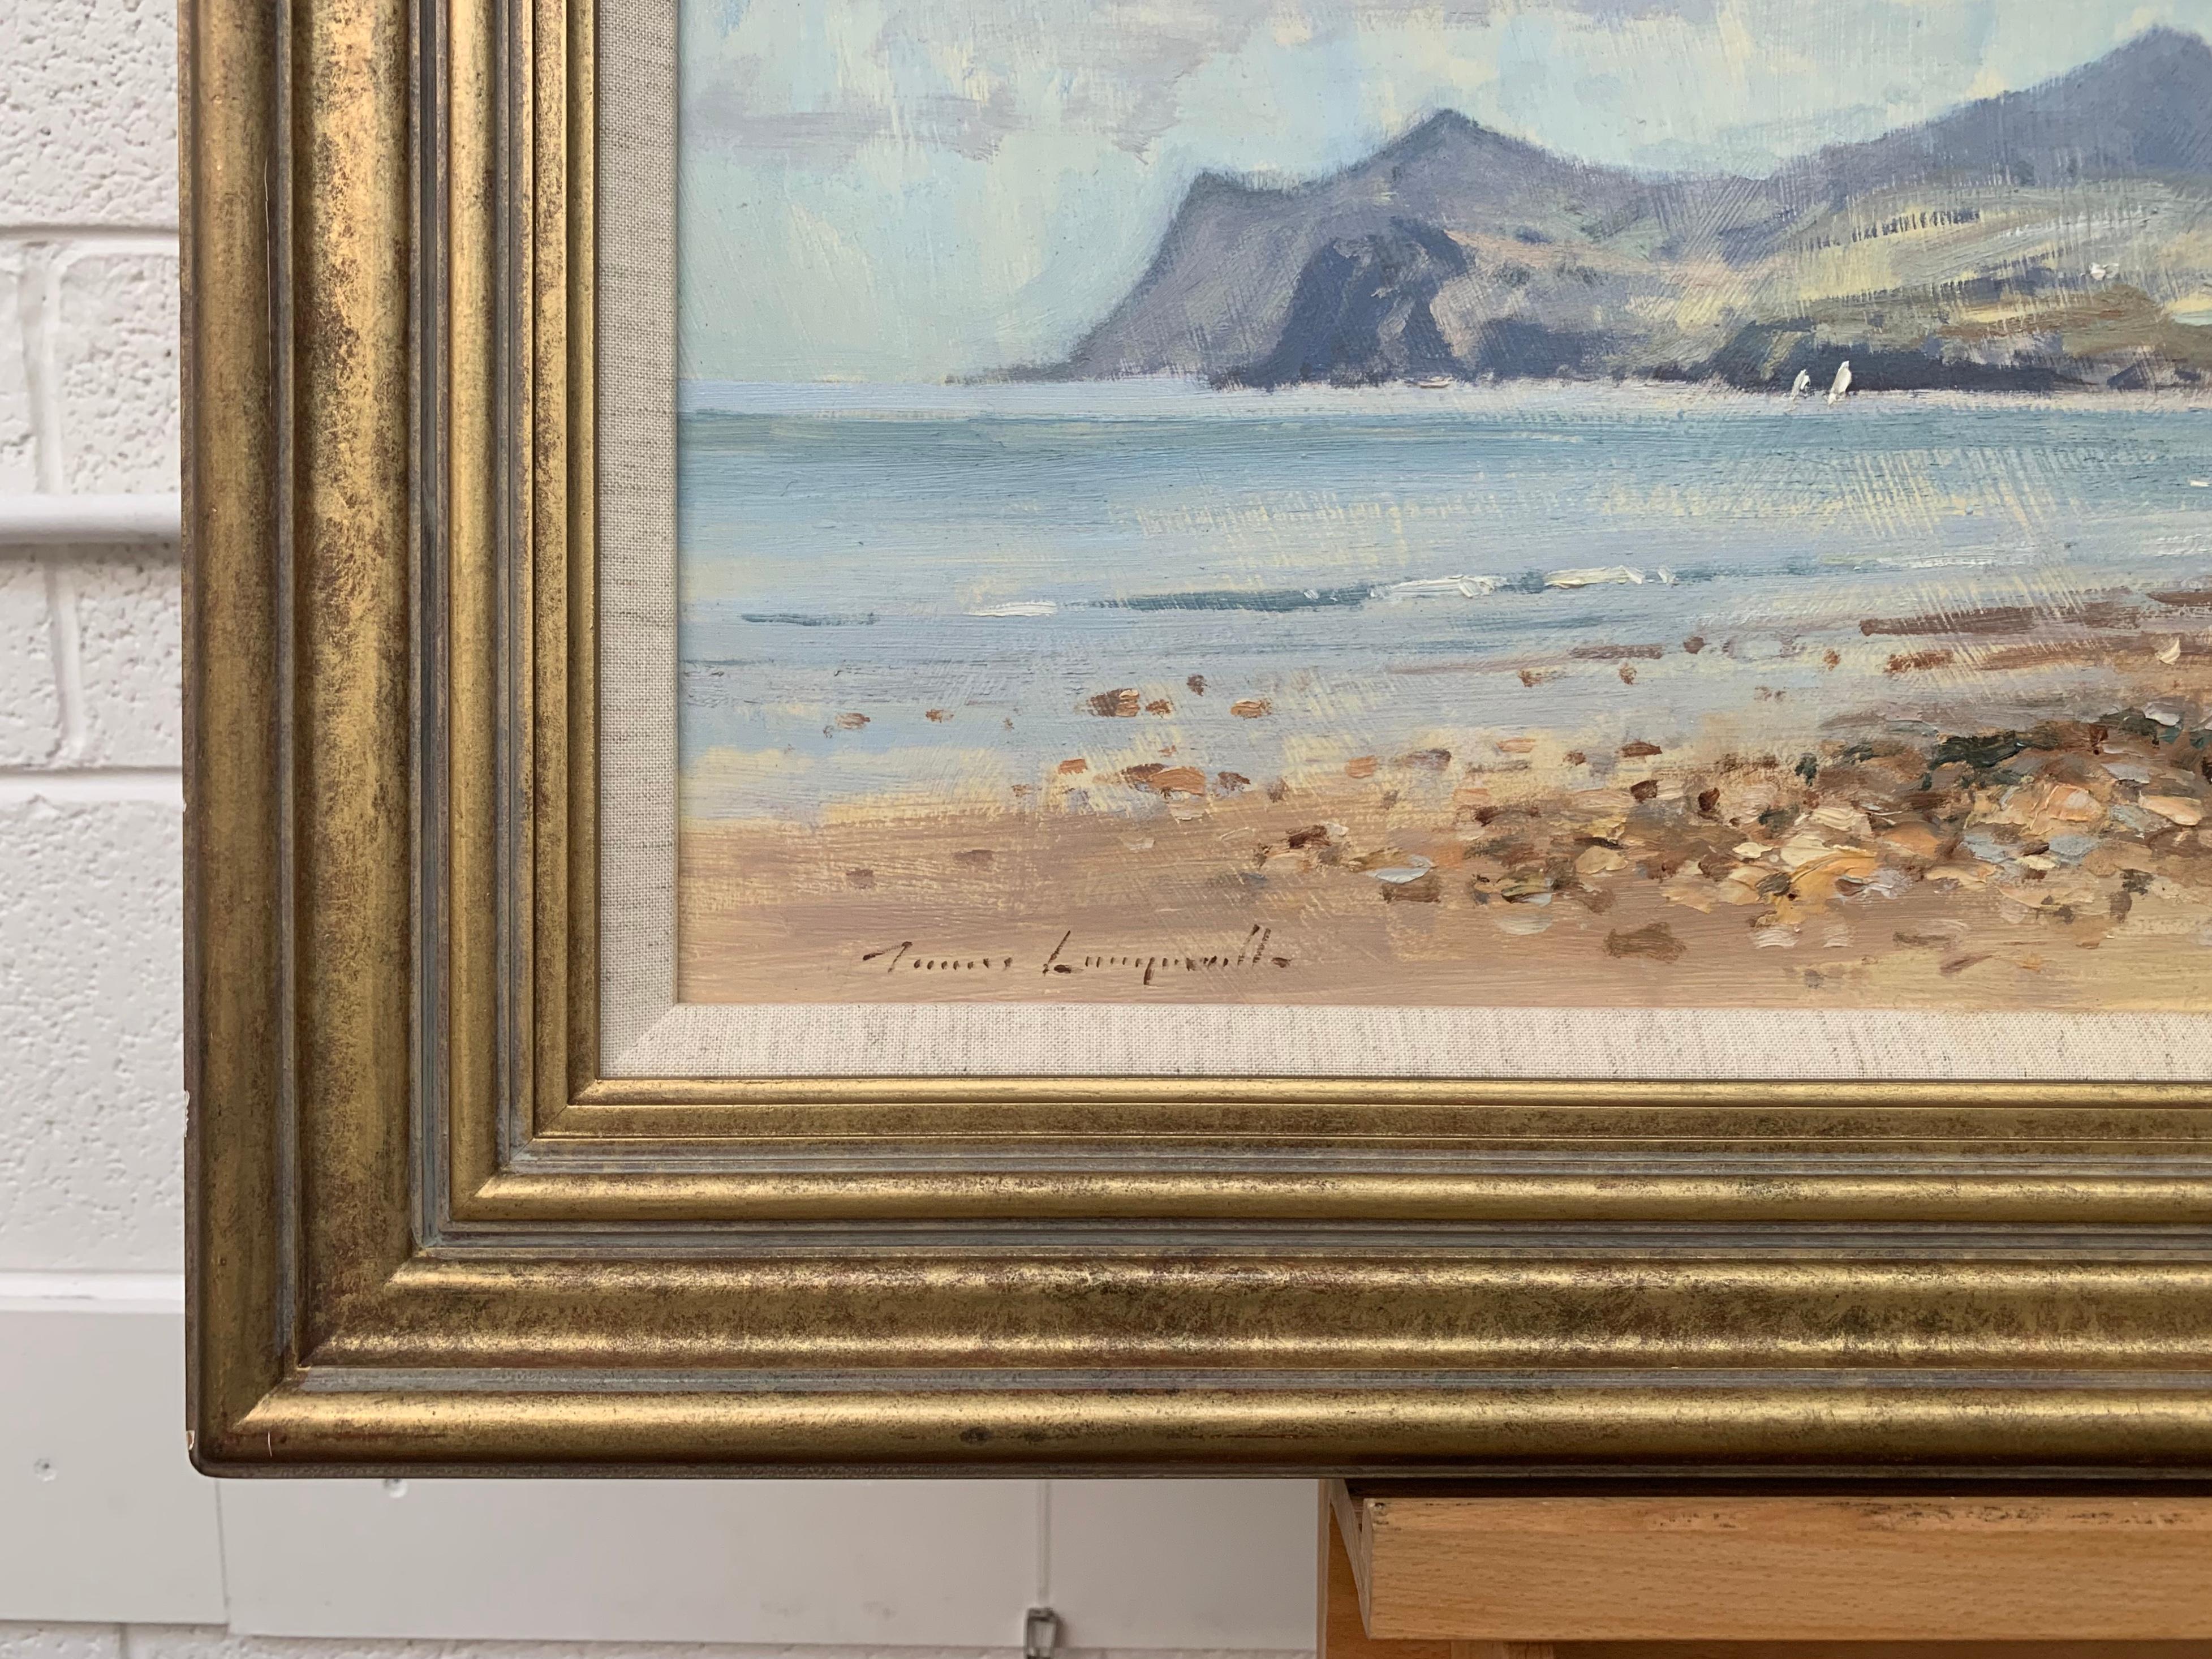 Landscape Seascape Painting of Coast from Nefyn in North Wales by British Artist - Brown Landscape Painting by James Longueville PS, RBSA